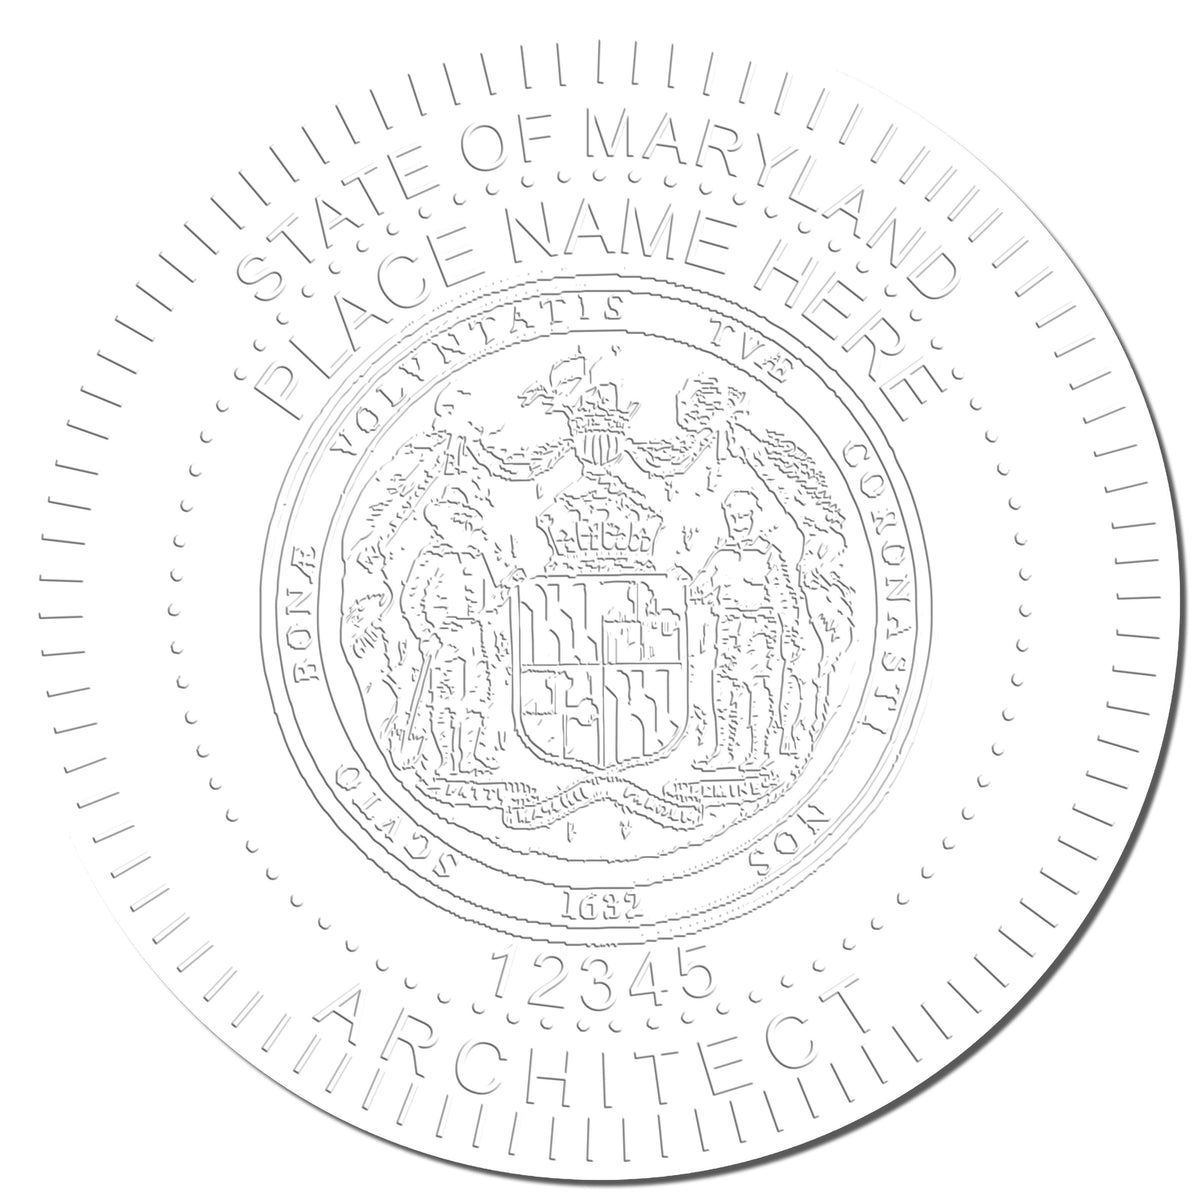 This paper is stamped with a sample imprint of the State of Maryland Architectural Seal Embosser, signifying its quality and reliability.